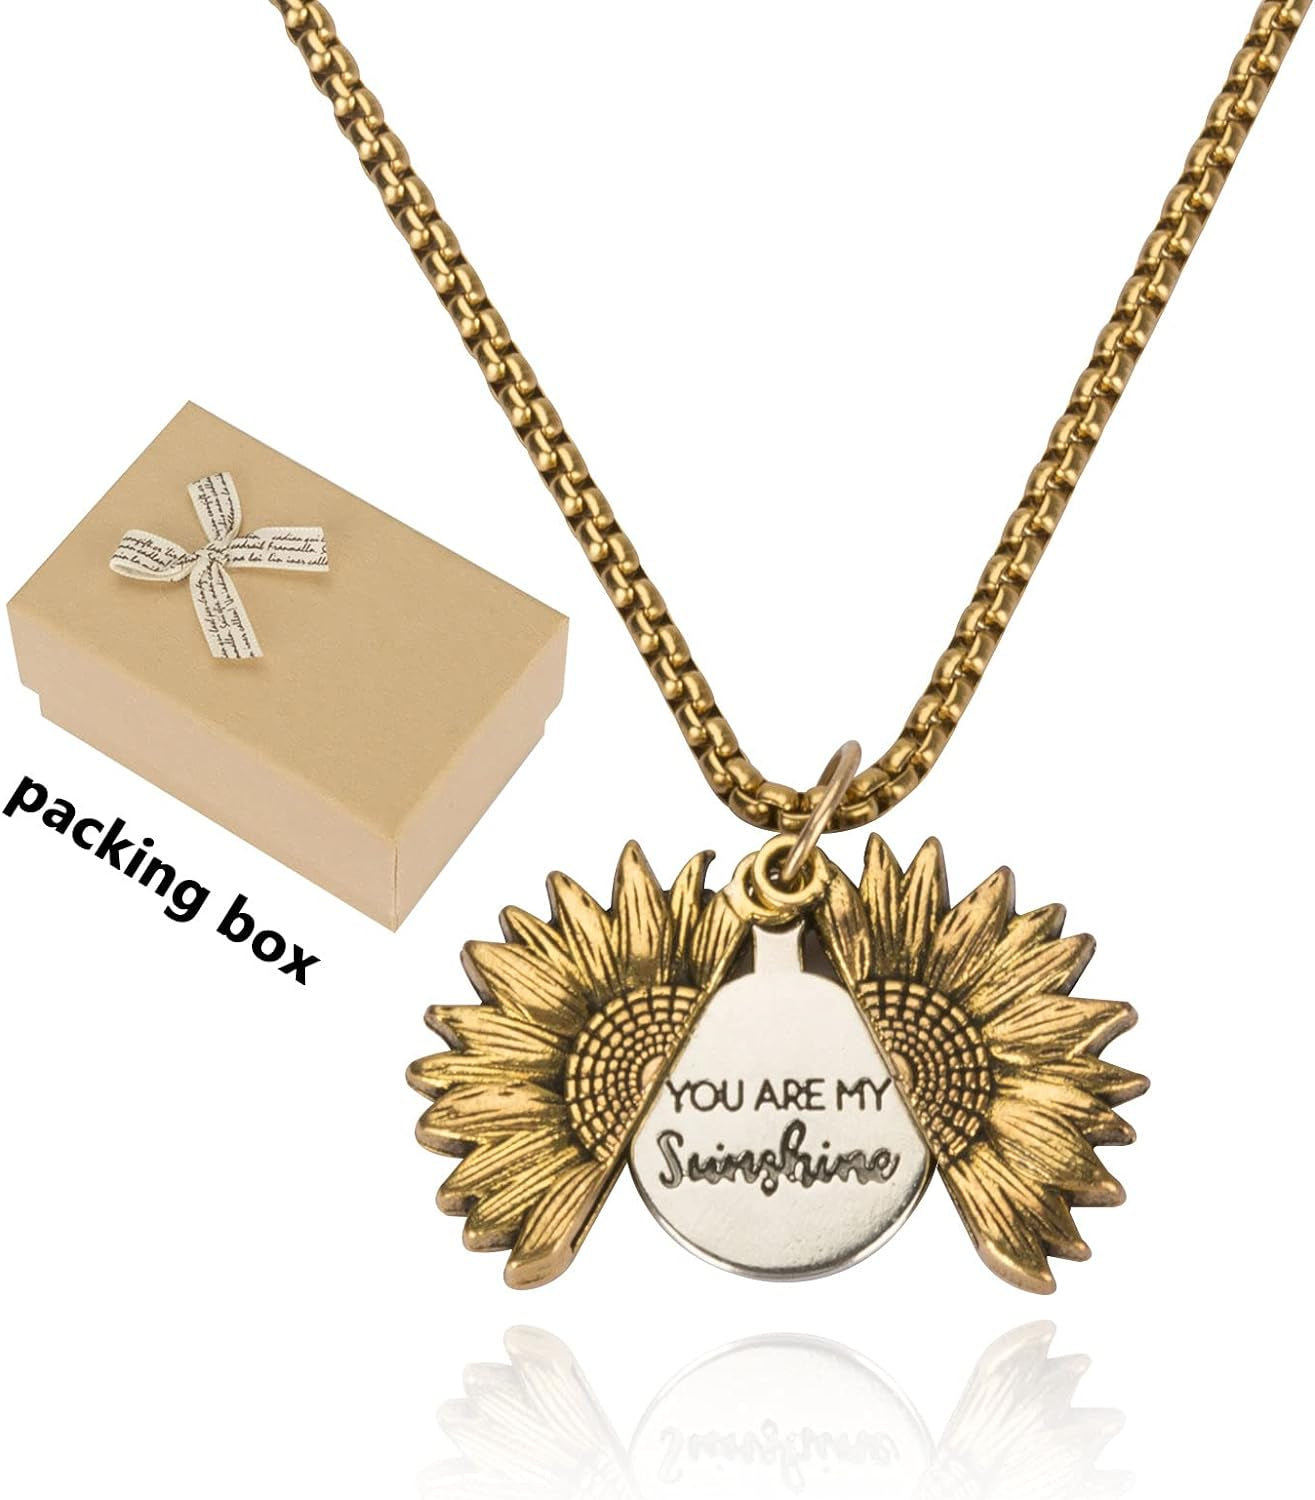 You Are My Sunshine Music Box with Necklace Gift Set - Tortuna